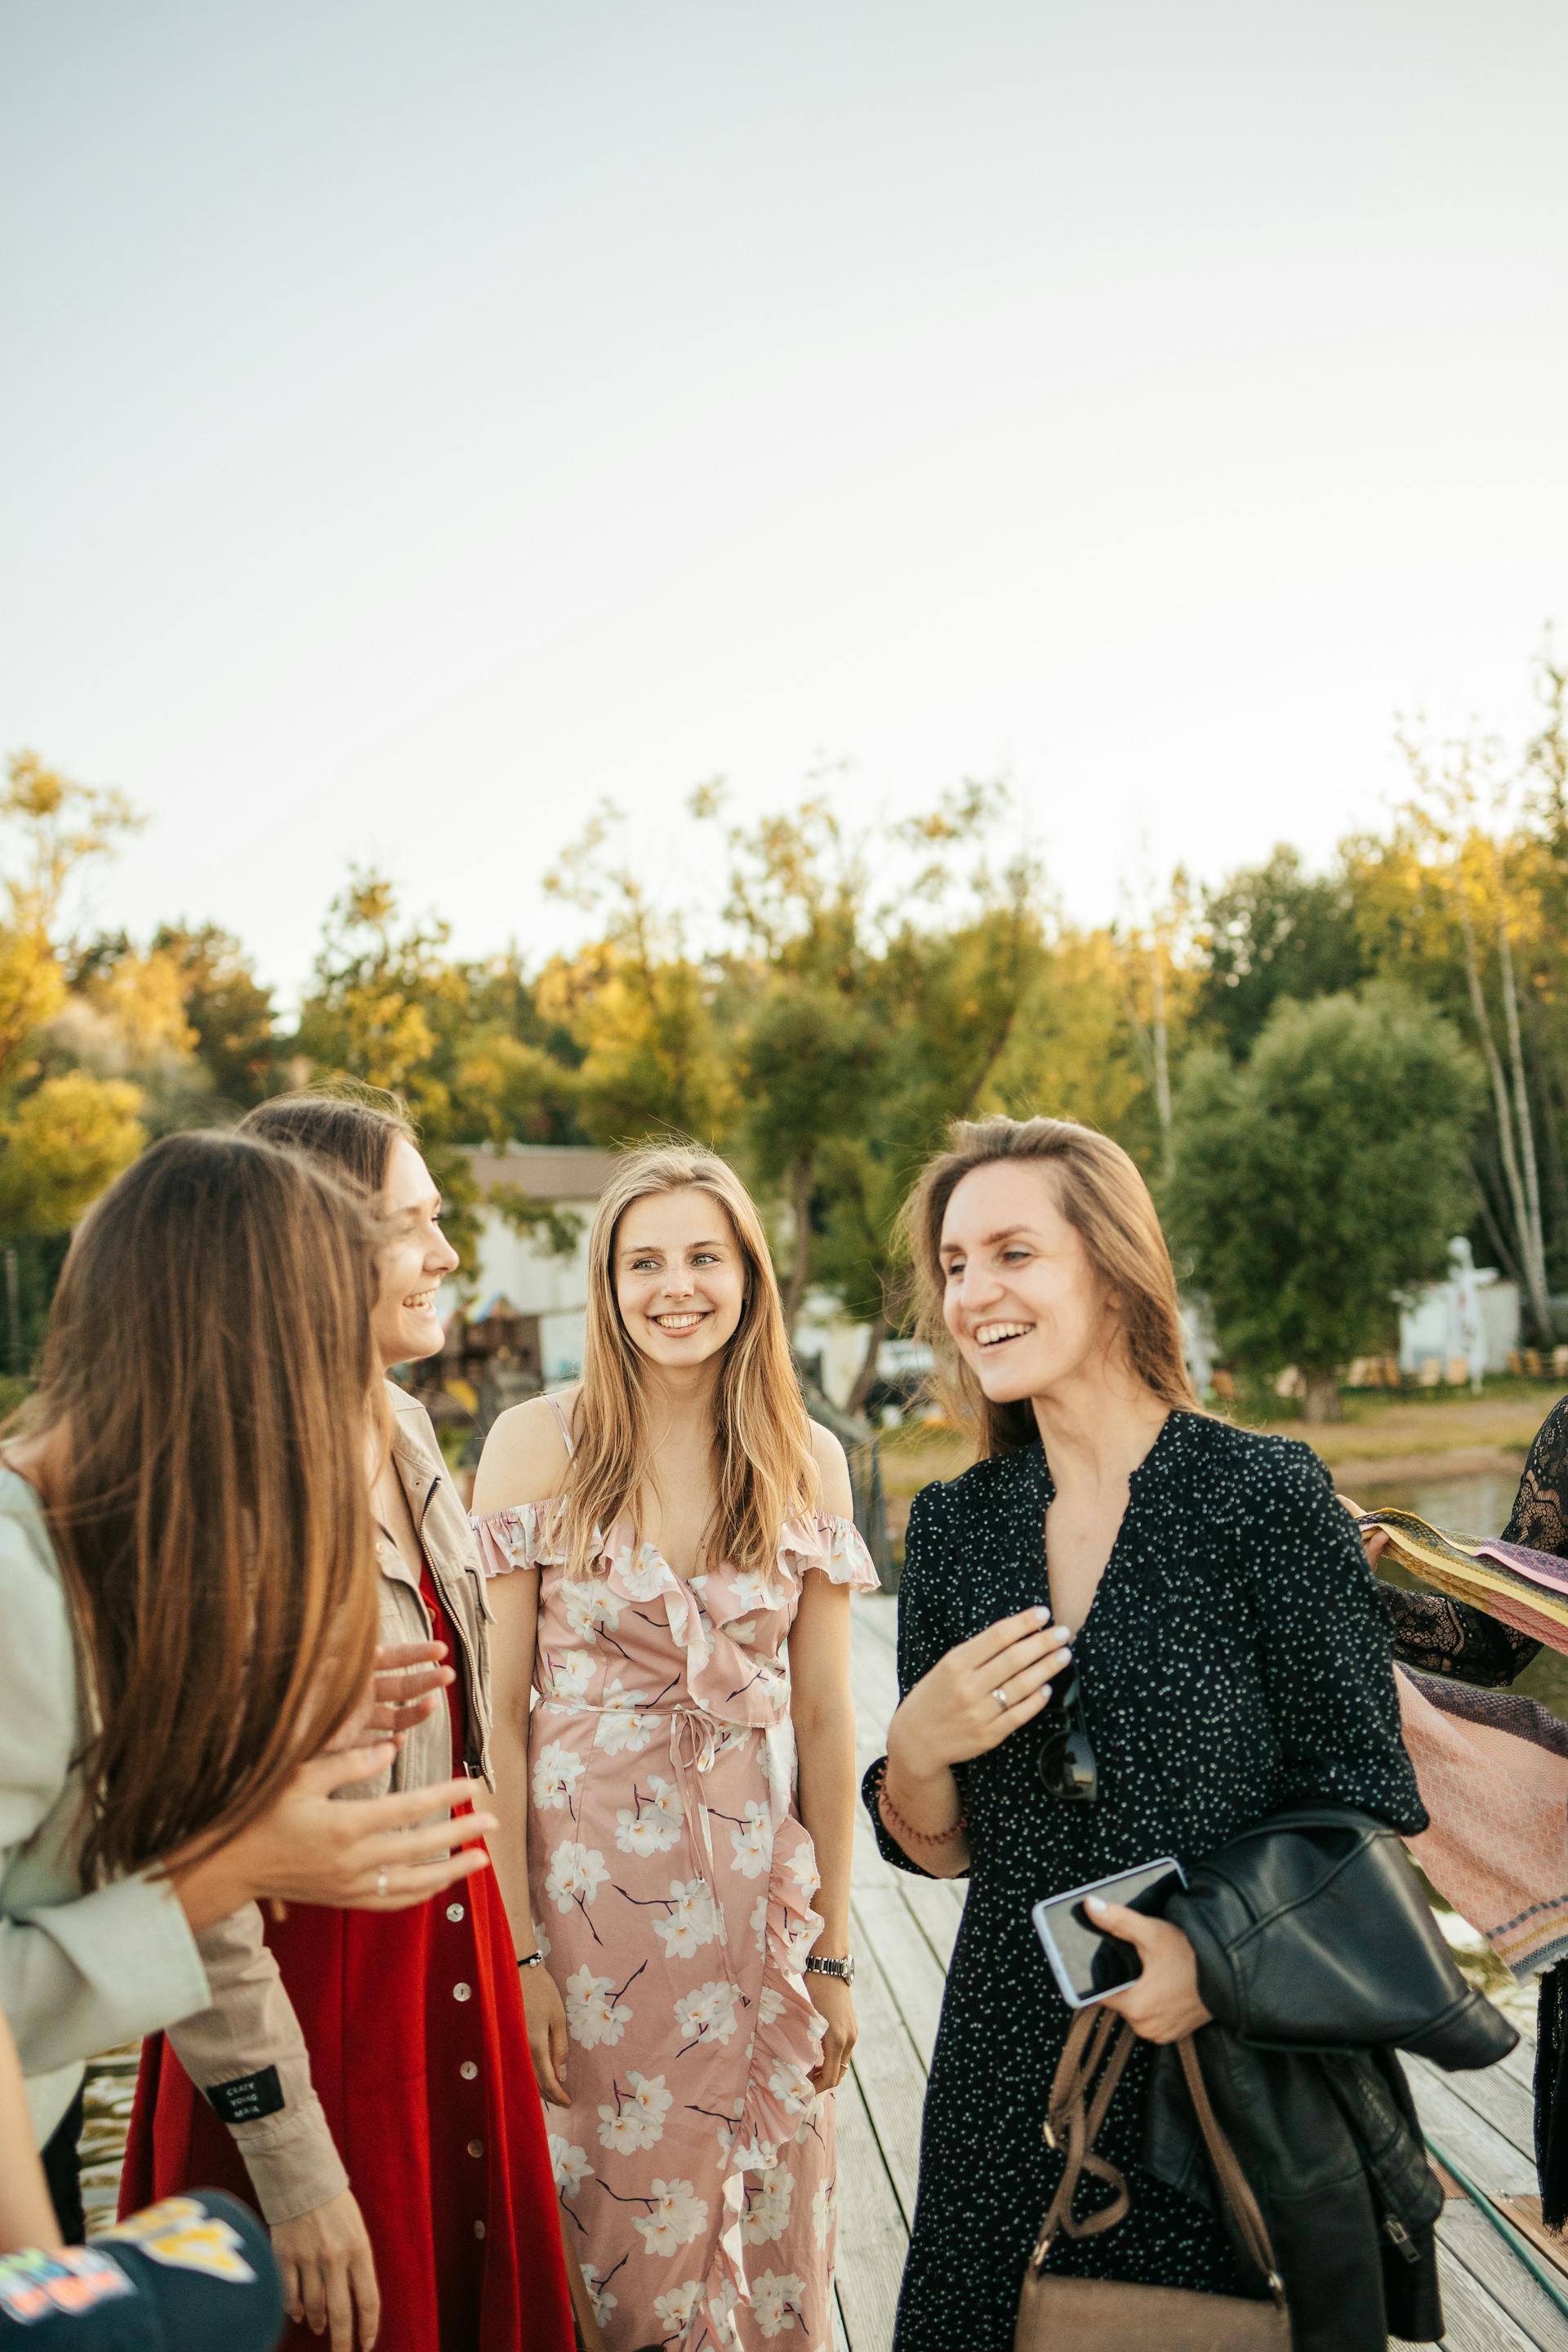 Women laughing while having a conversation | Source: Pexels